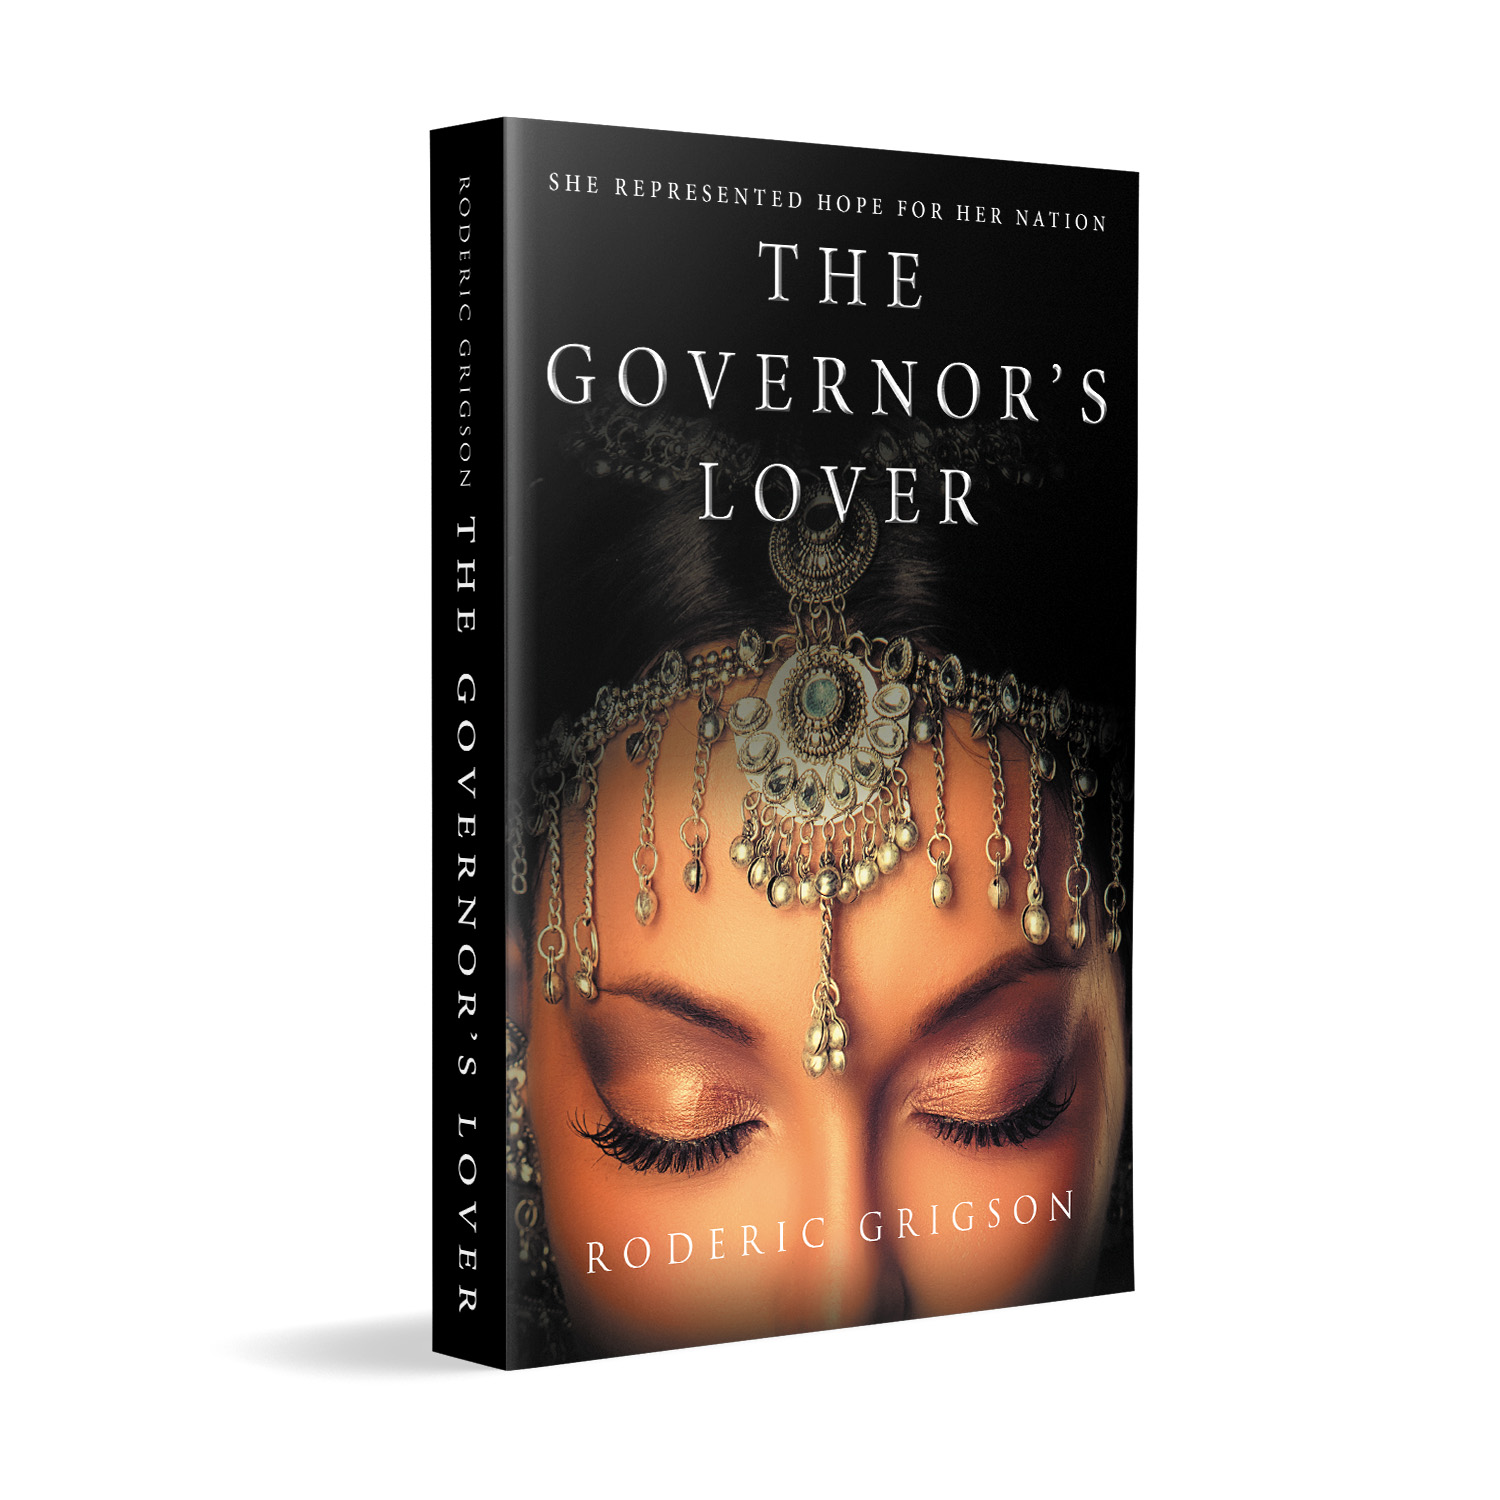 'The Governor's Lover' is a sweeping historical romance set in Colonial Ceylon in the early 19th Century. The author is Roderic Grigson. The book cover and interior design are by Mark Thomas. To learn more about what Mark could do for your book, please visit coverness.com.